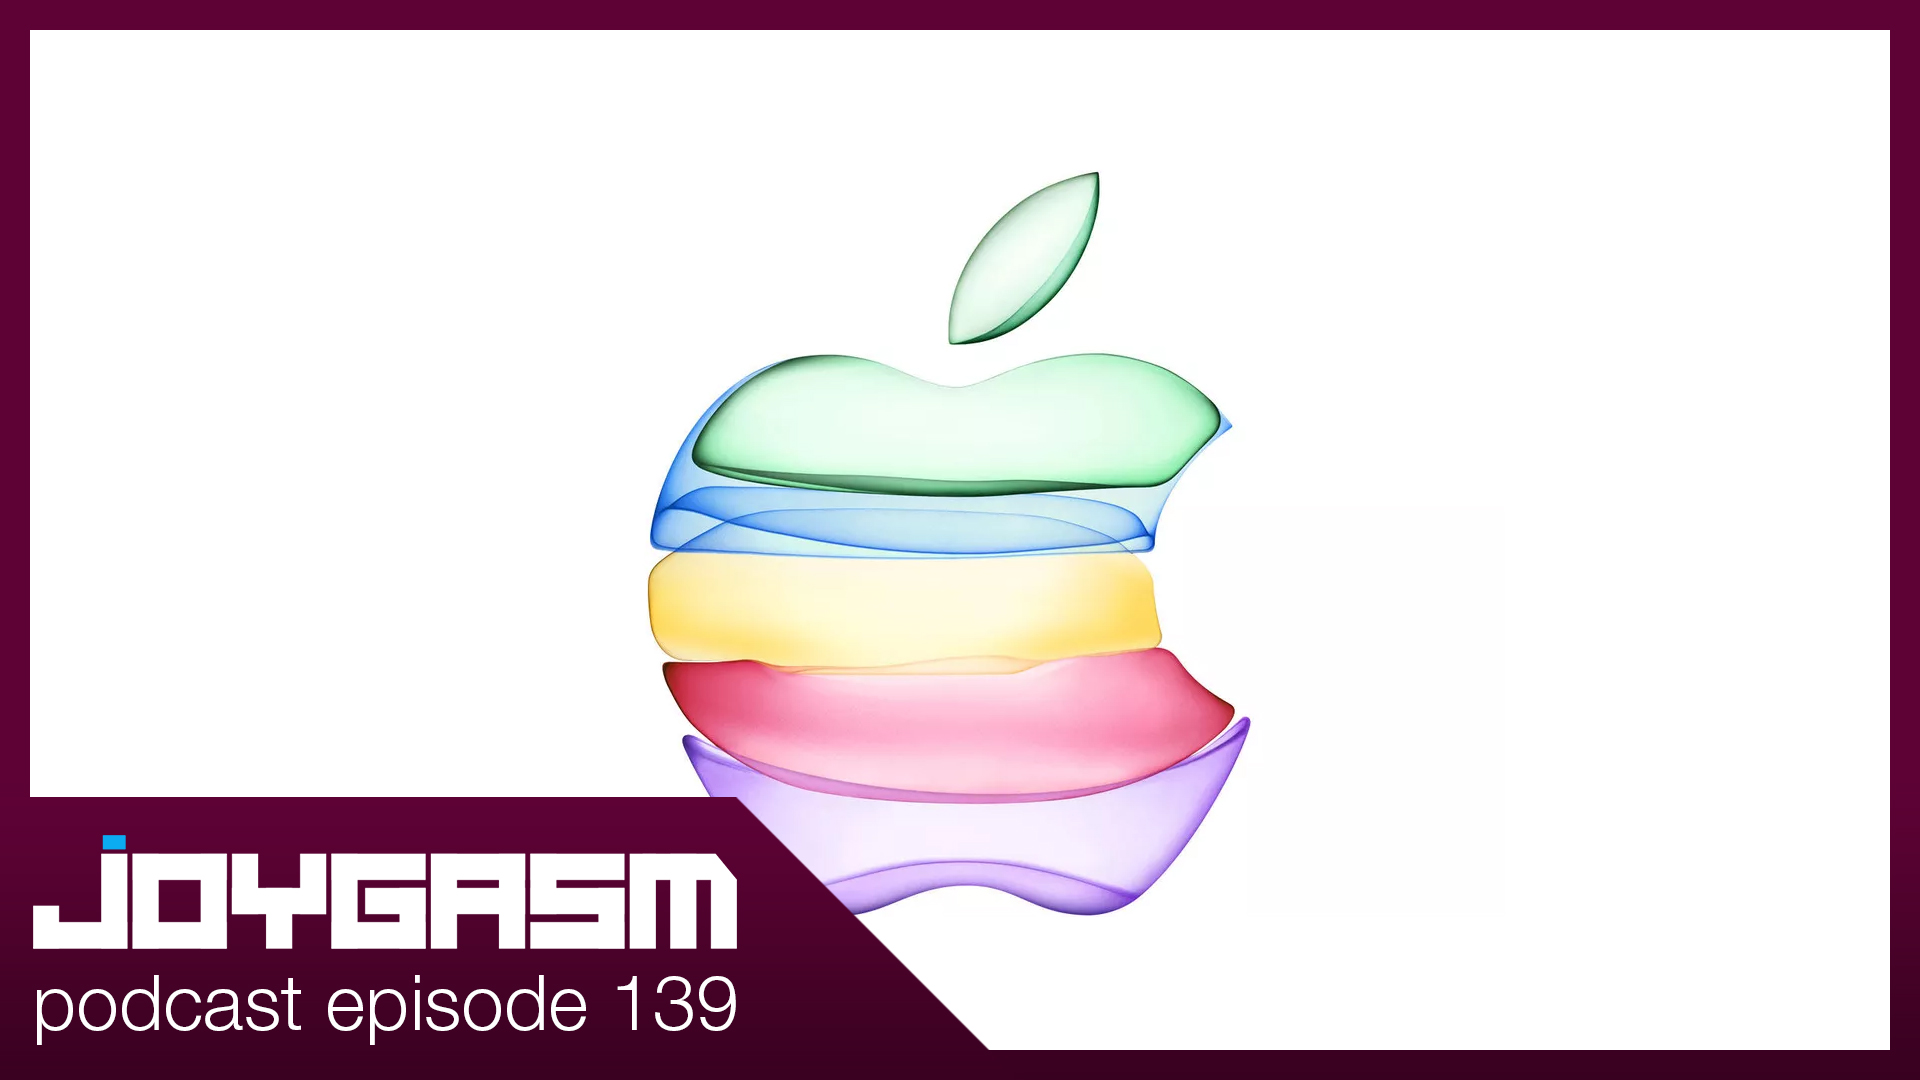 Ep. 139: Apple Event 2019 & More